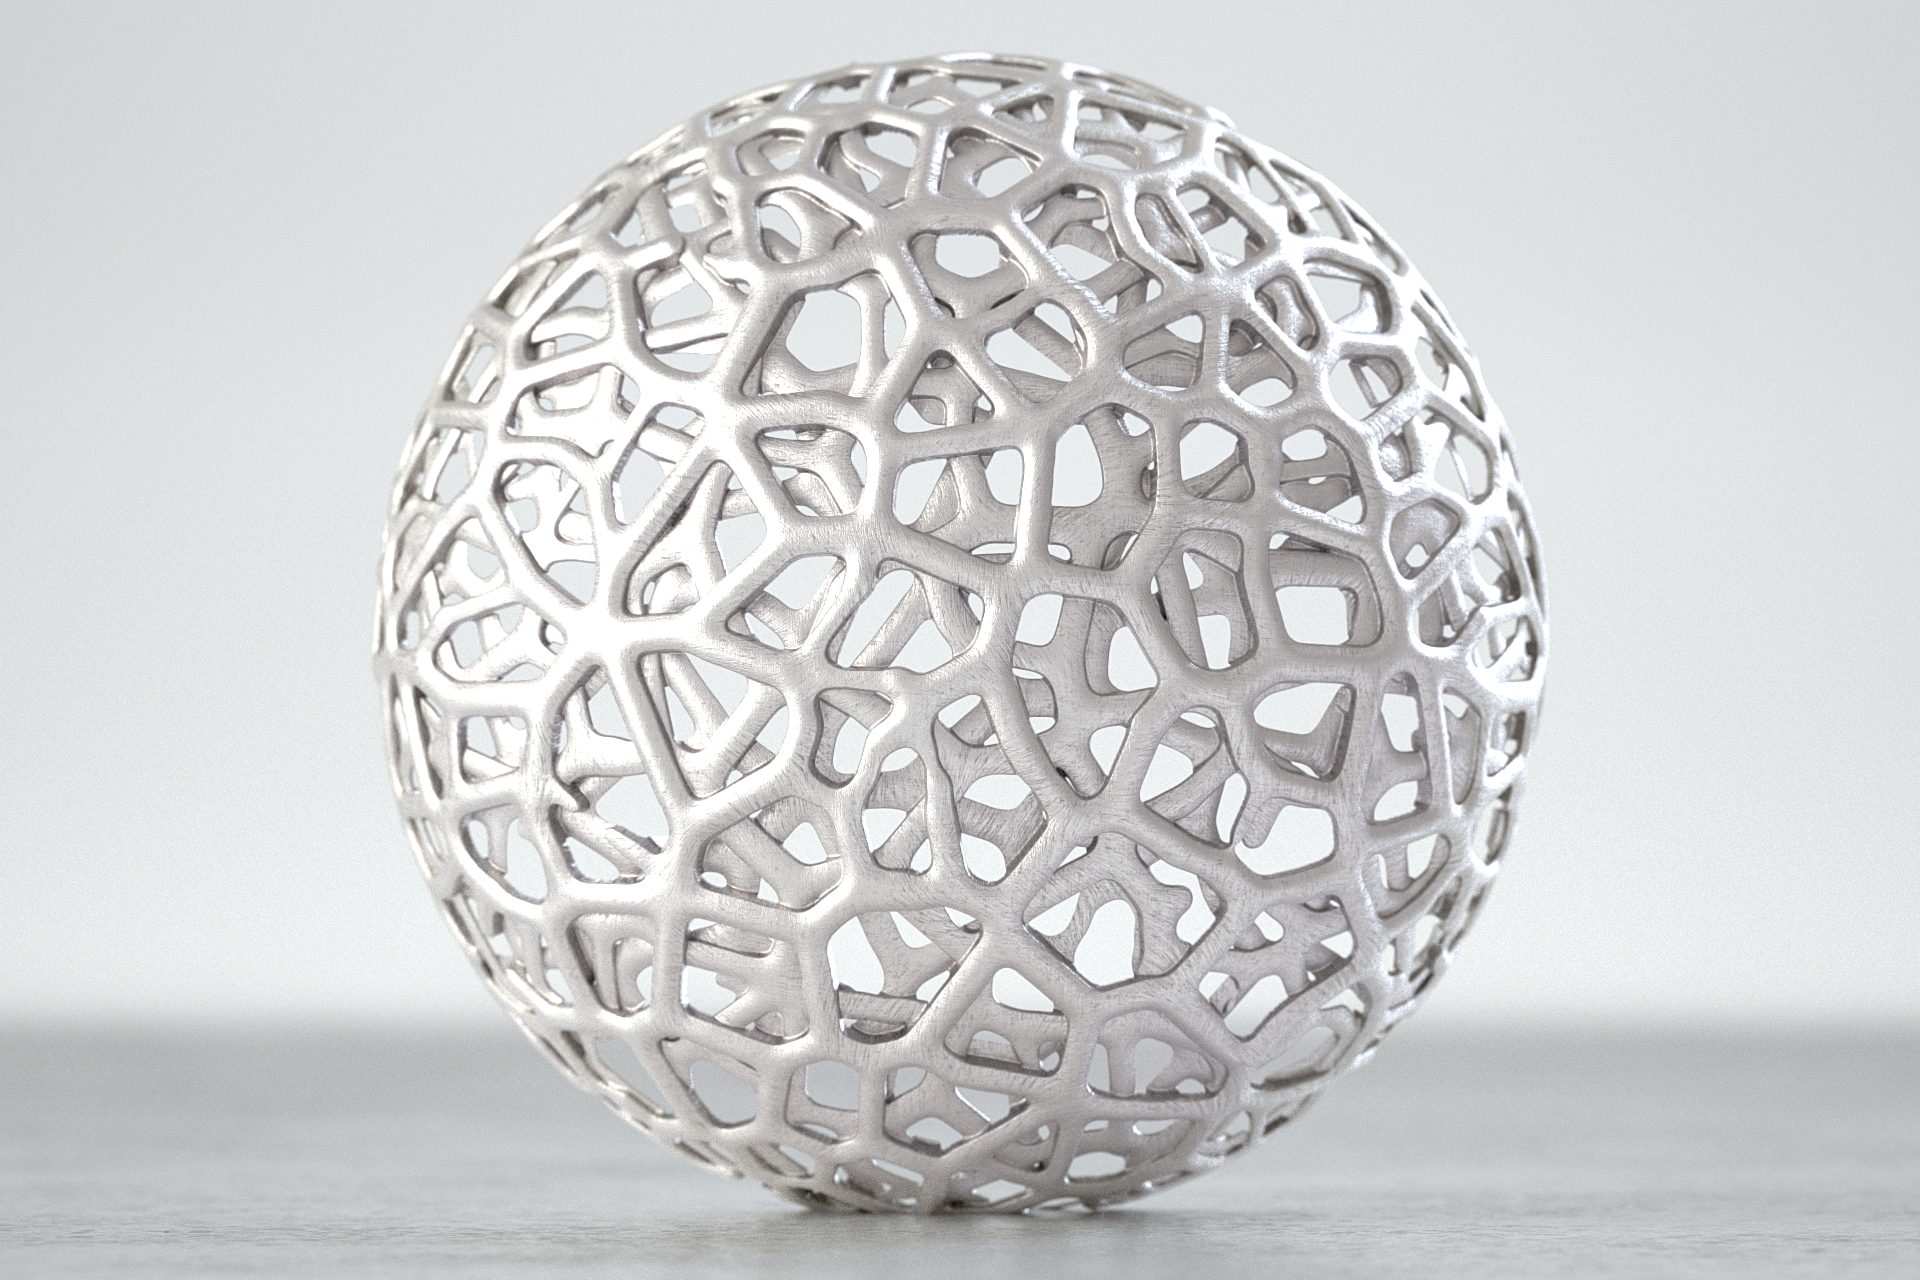 New Materials to Help Visualize 3D  Printed Objects 